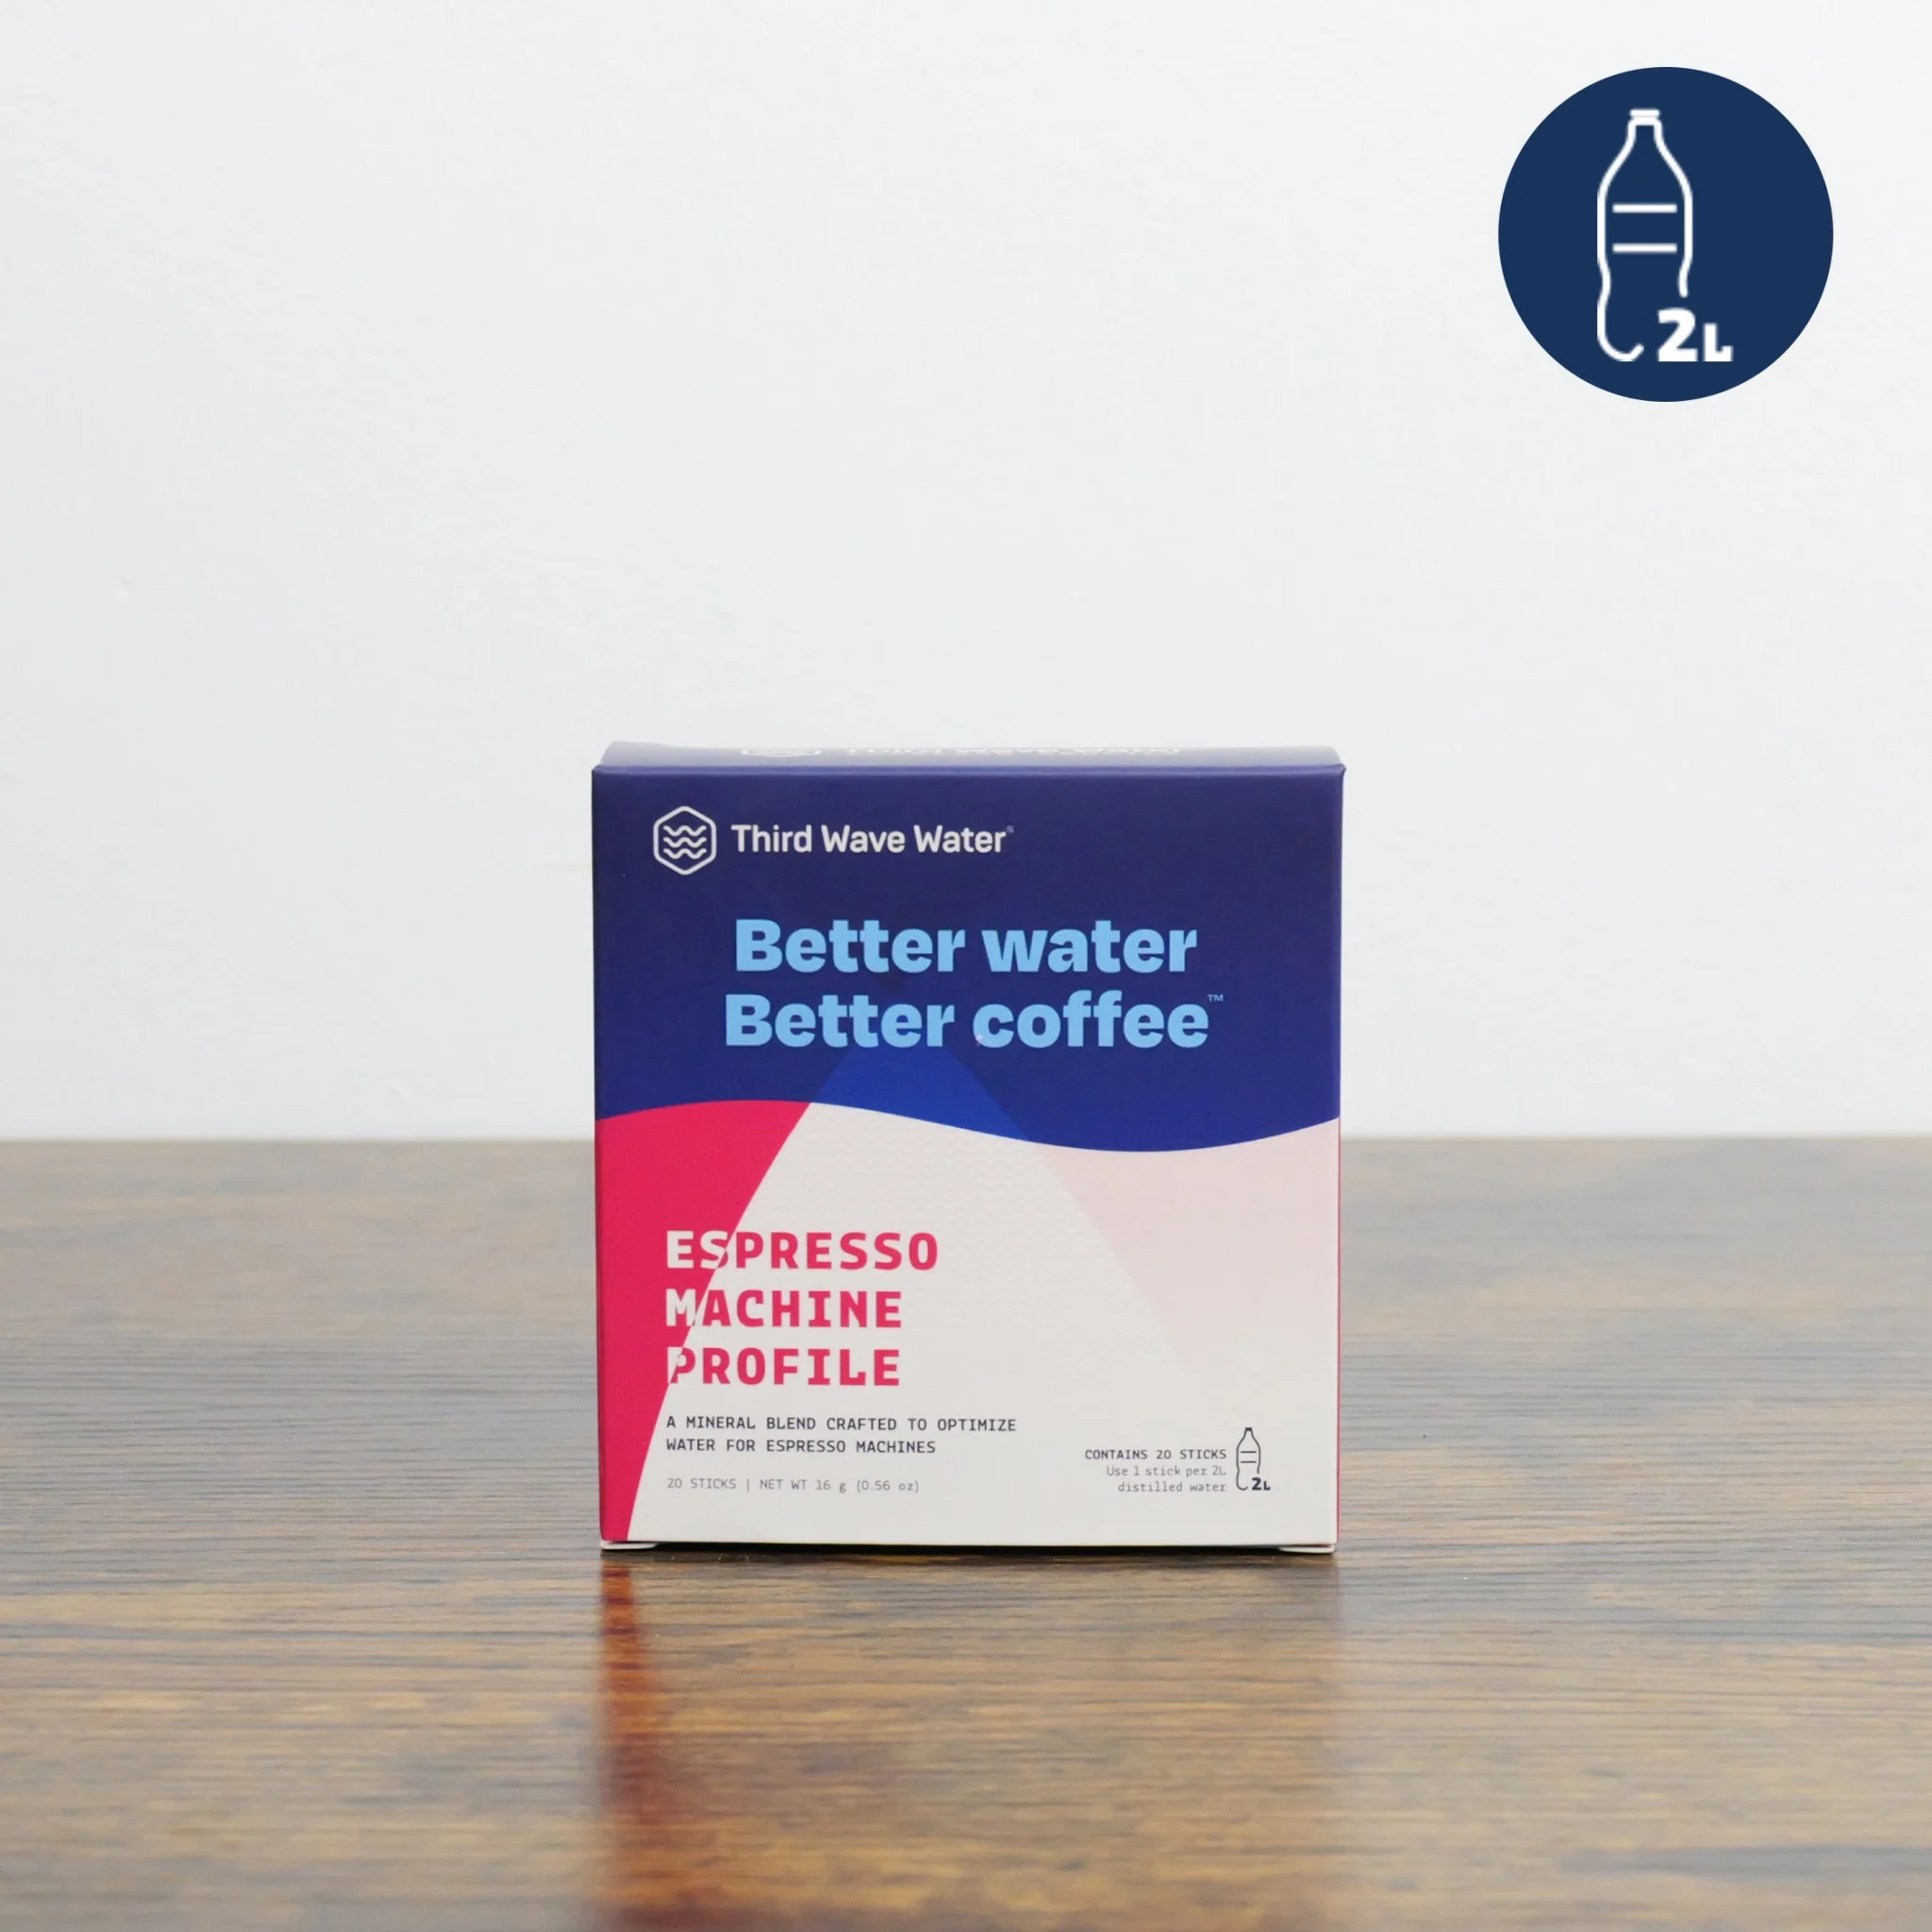 THIRD WAVE WATER - 20 Packs of 2L Sachet (Makes 40L)